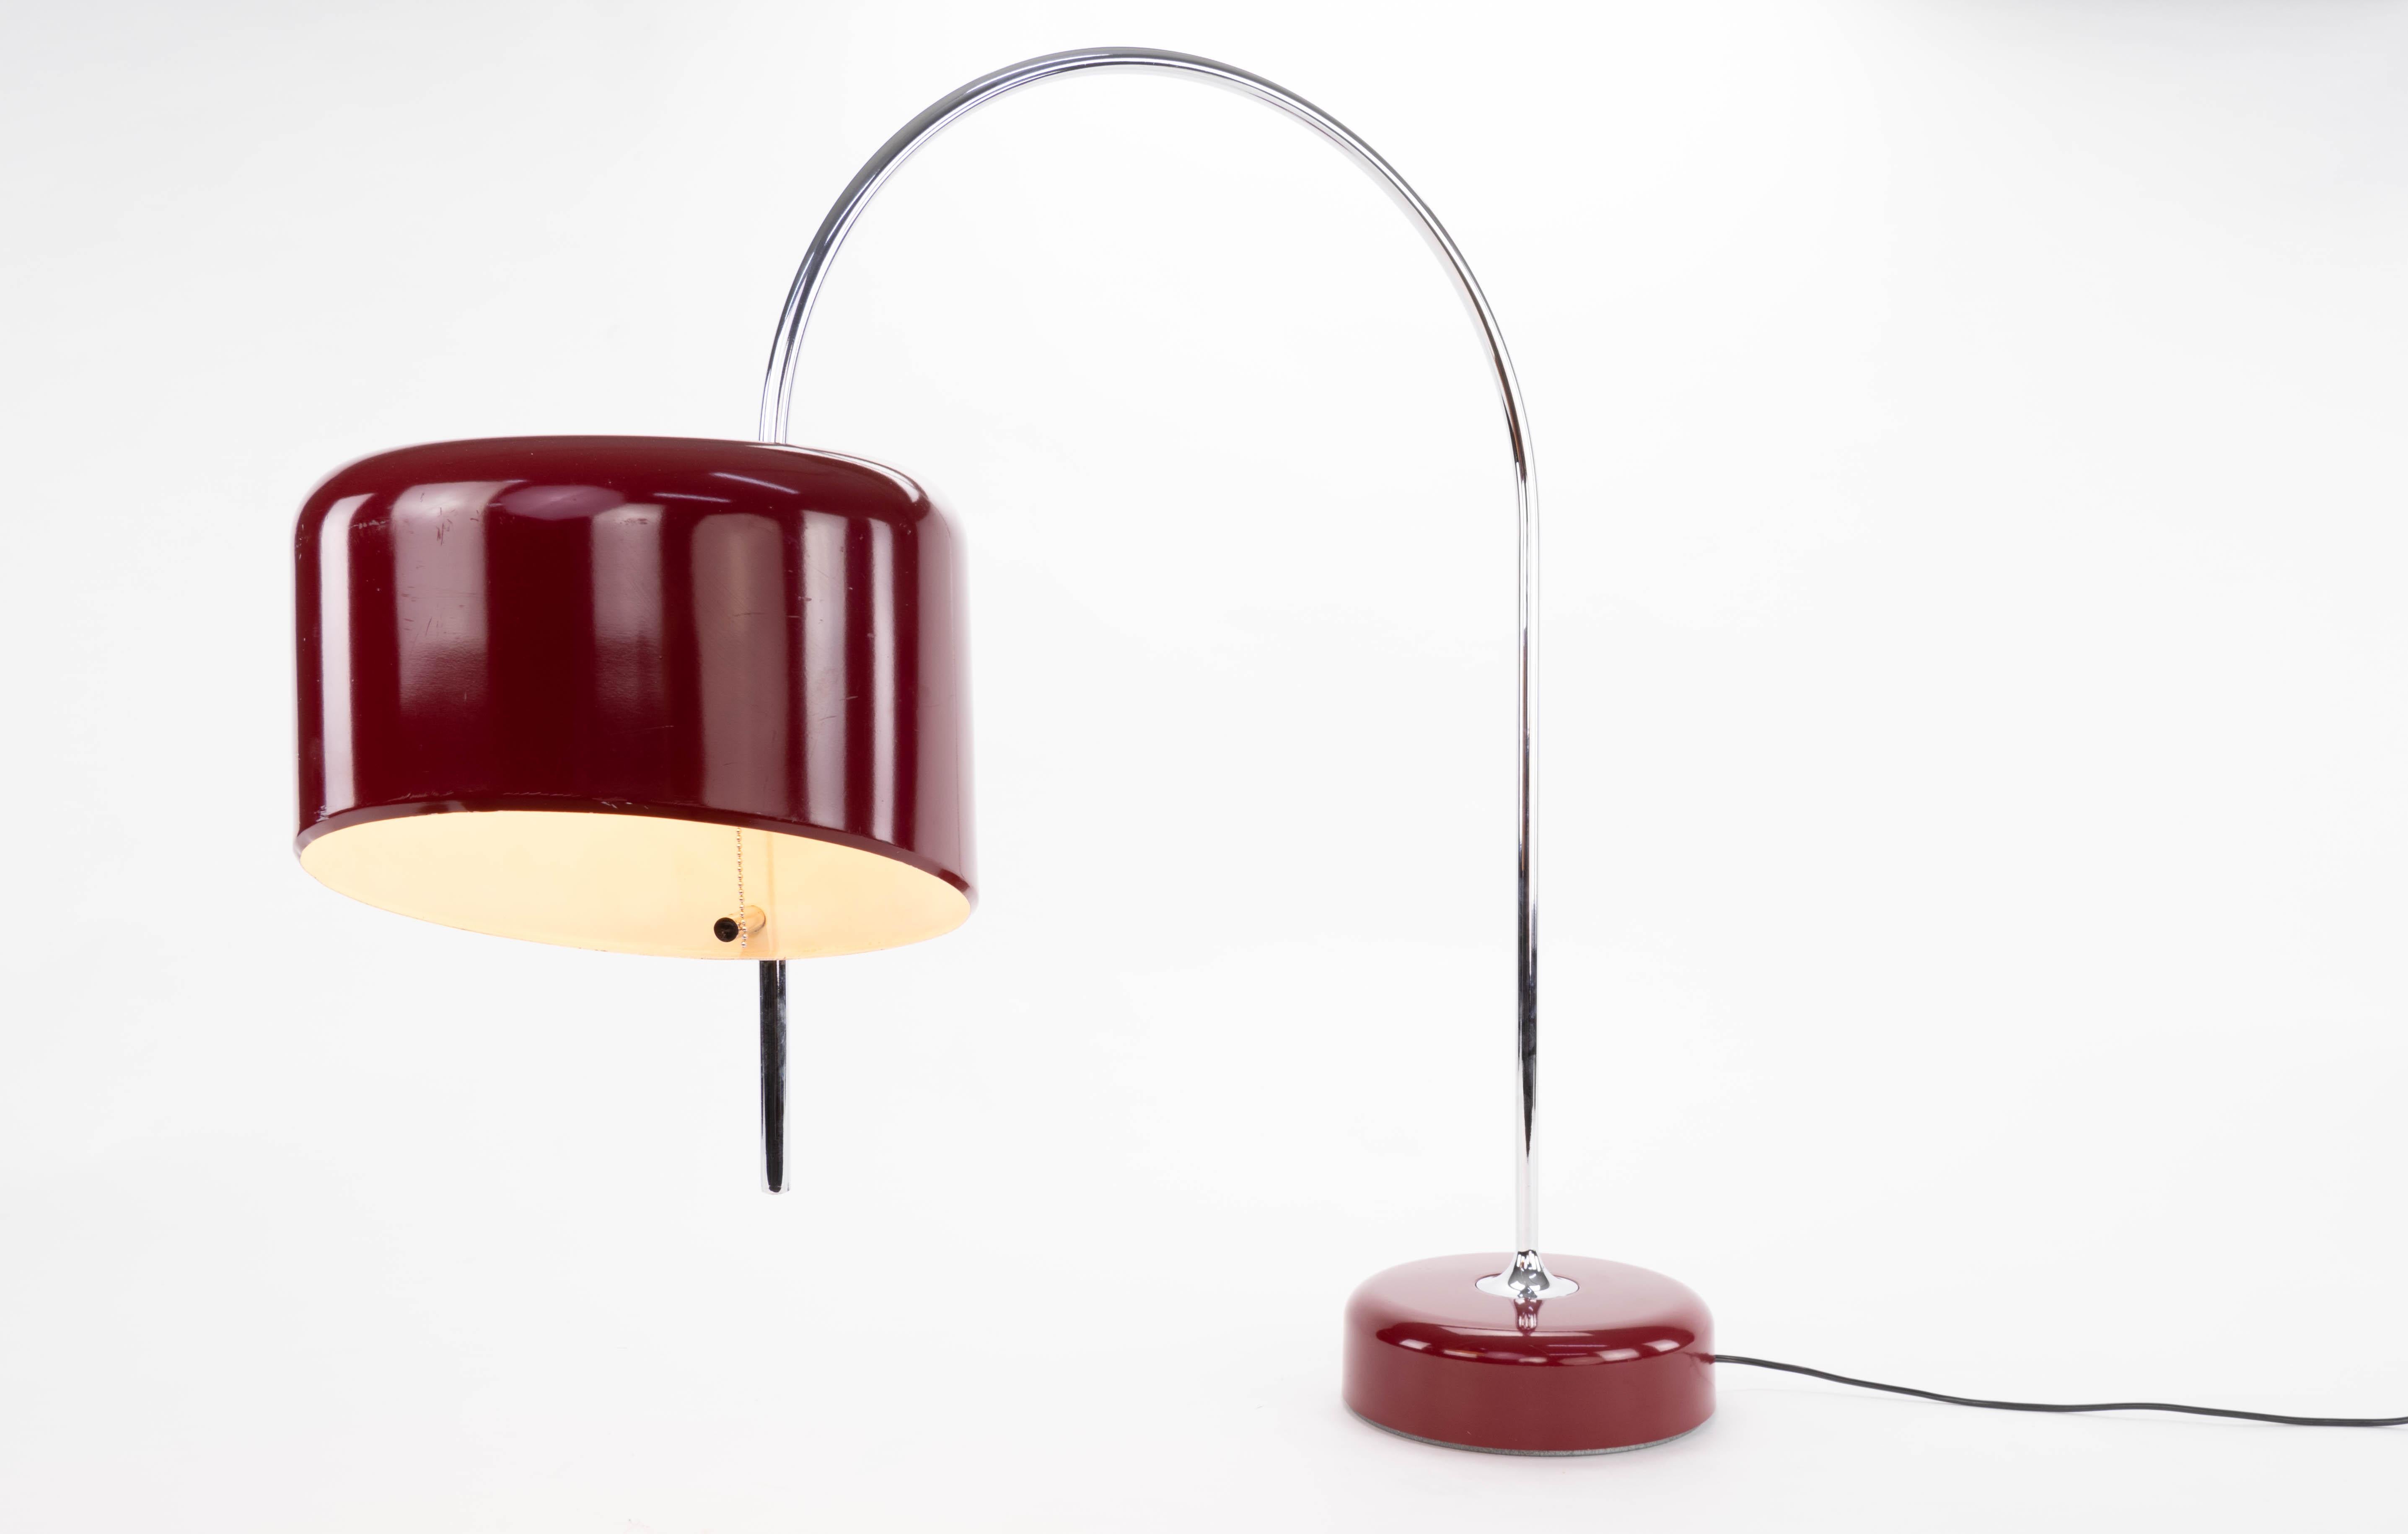 Lacquered Sauce Mid-Century Modern Arc Table Lamp by Face Spain 1960